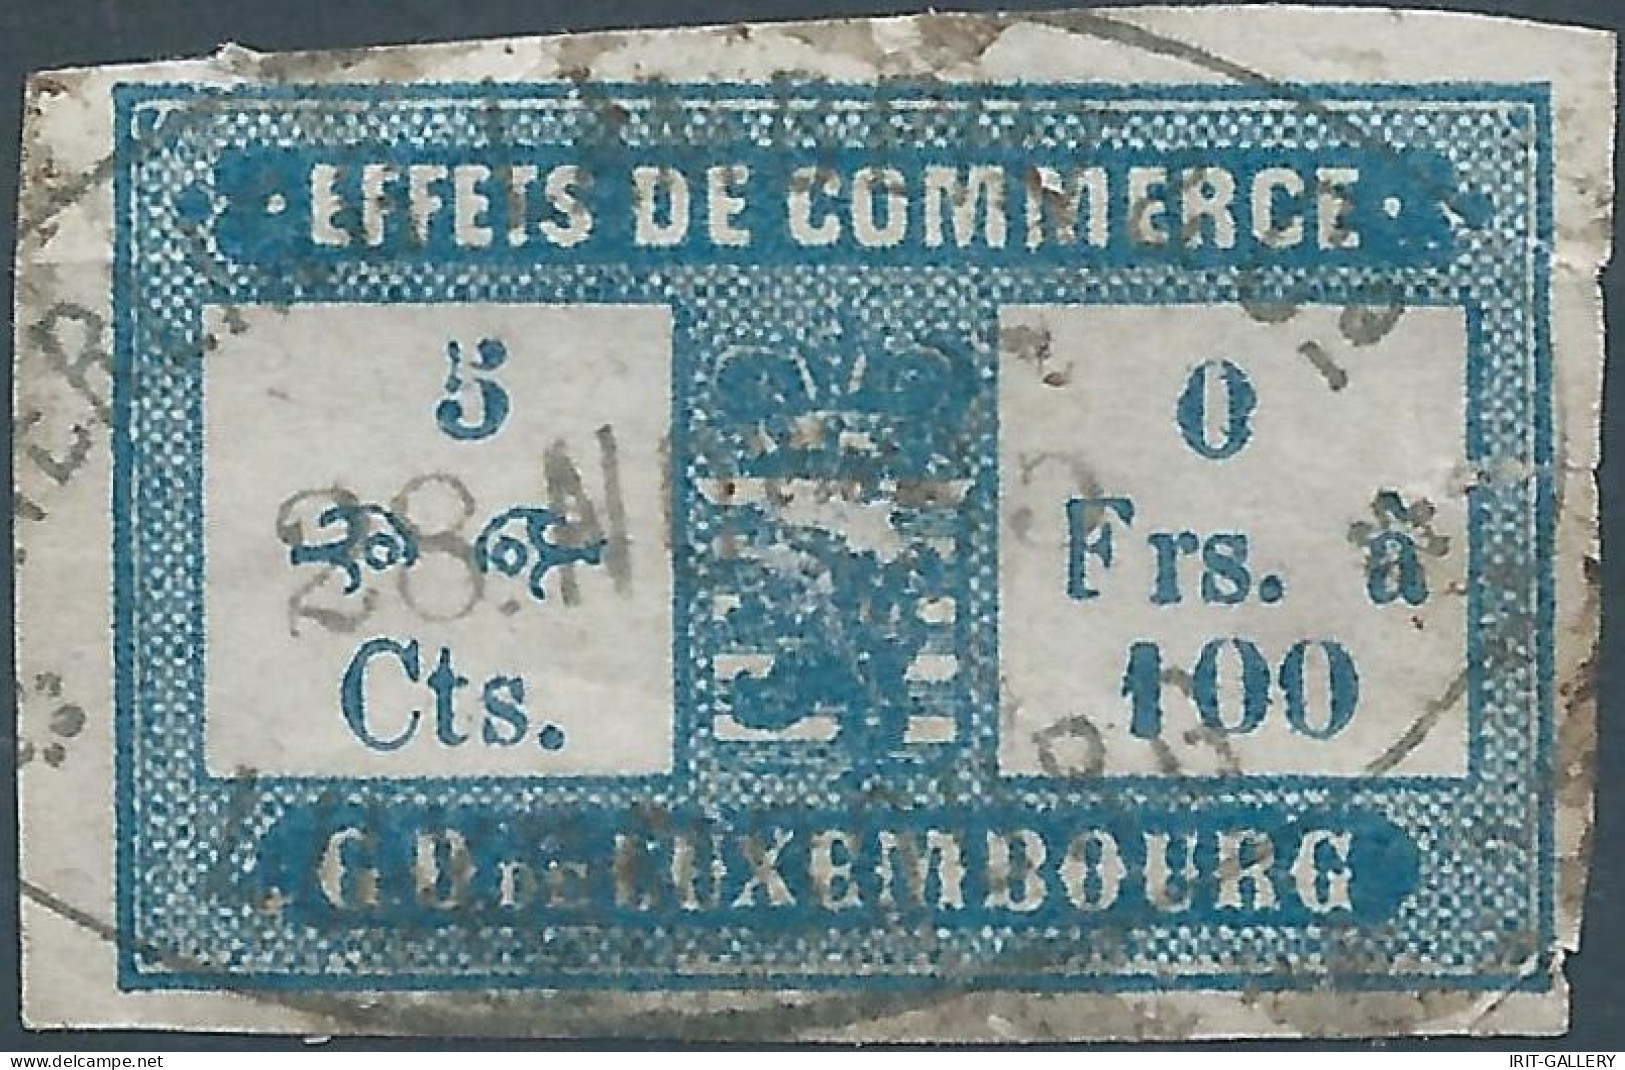 Lussemburgo - G.D De LUXEMBOURG,1885 Revenue Stamp Tax Fiscal , EFFETS DE COMMERCE-TRADING EFFECTS , Very Old - Fiscales